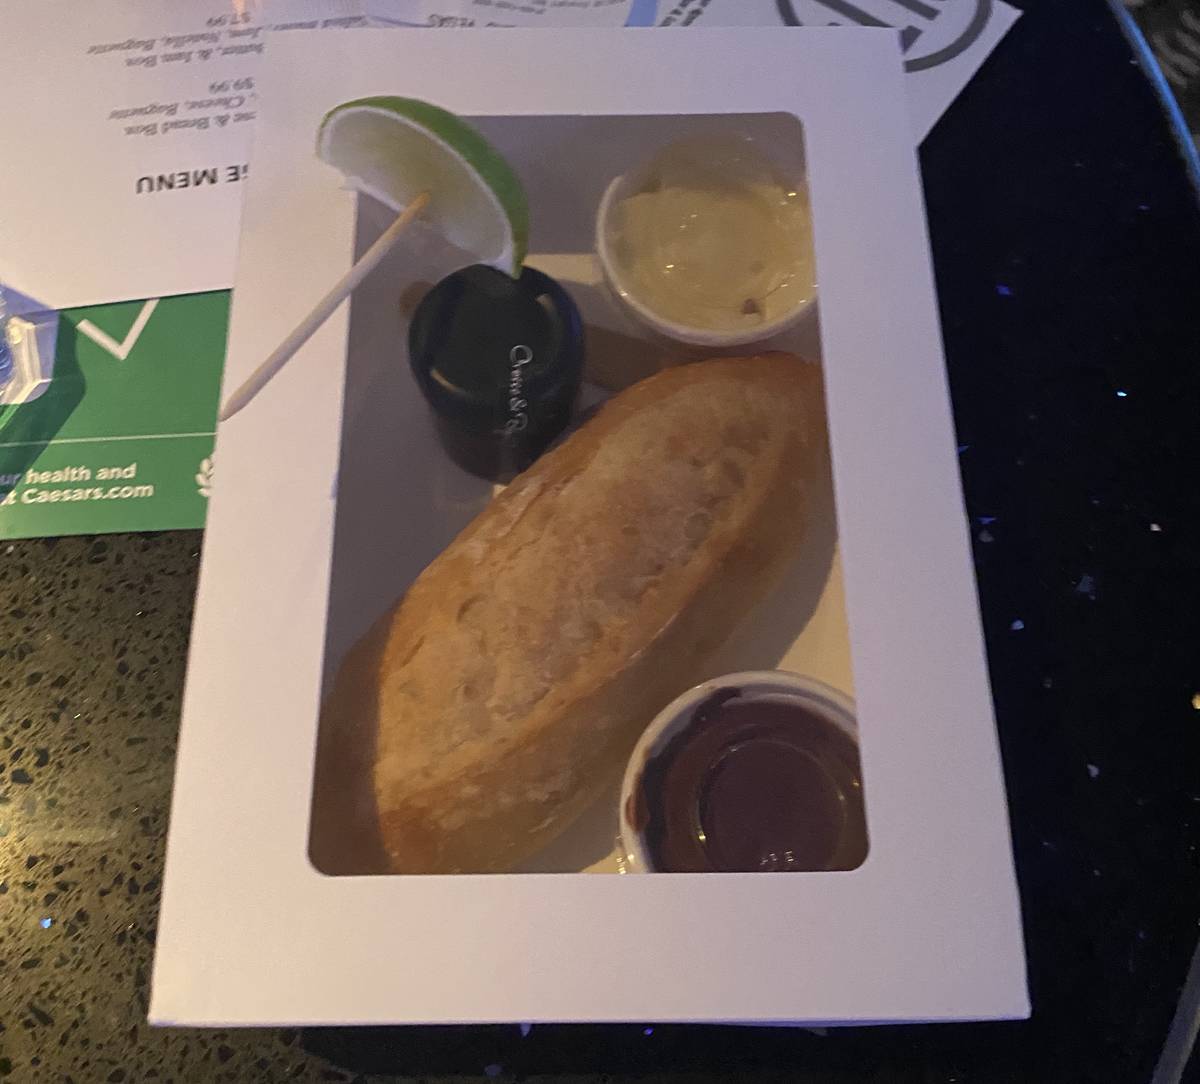 A look at one of the food boxes offered at Indigo lounge at Bally's on Saturday, Aug. 9, 2020. ...